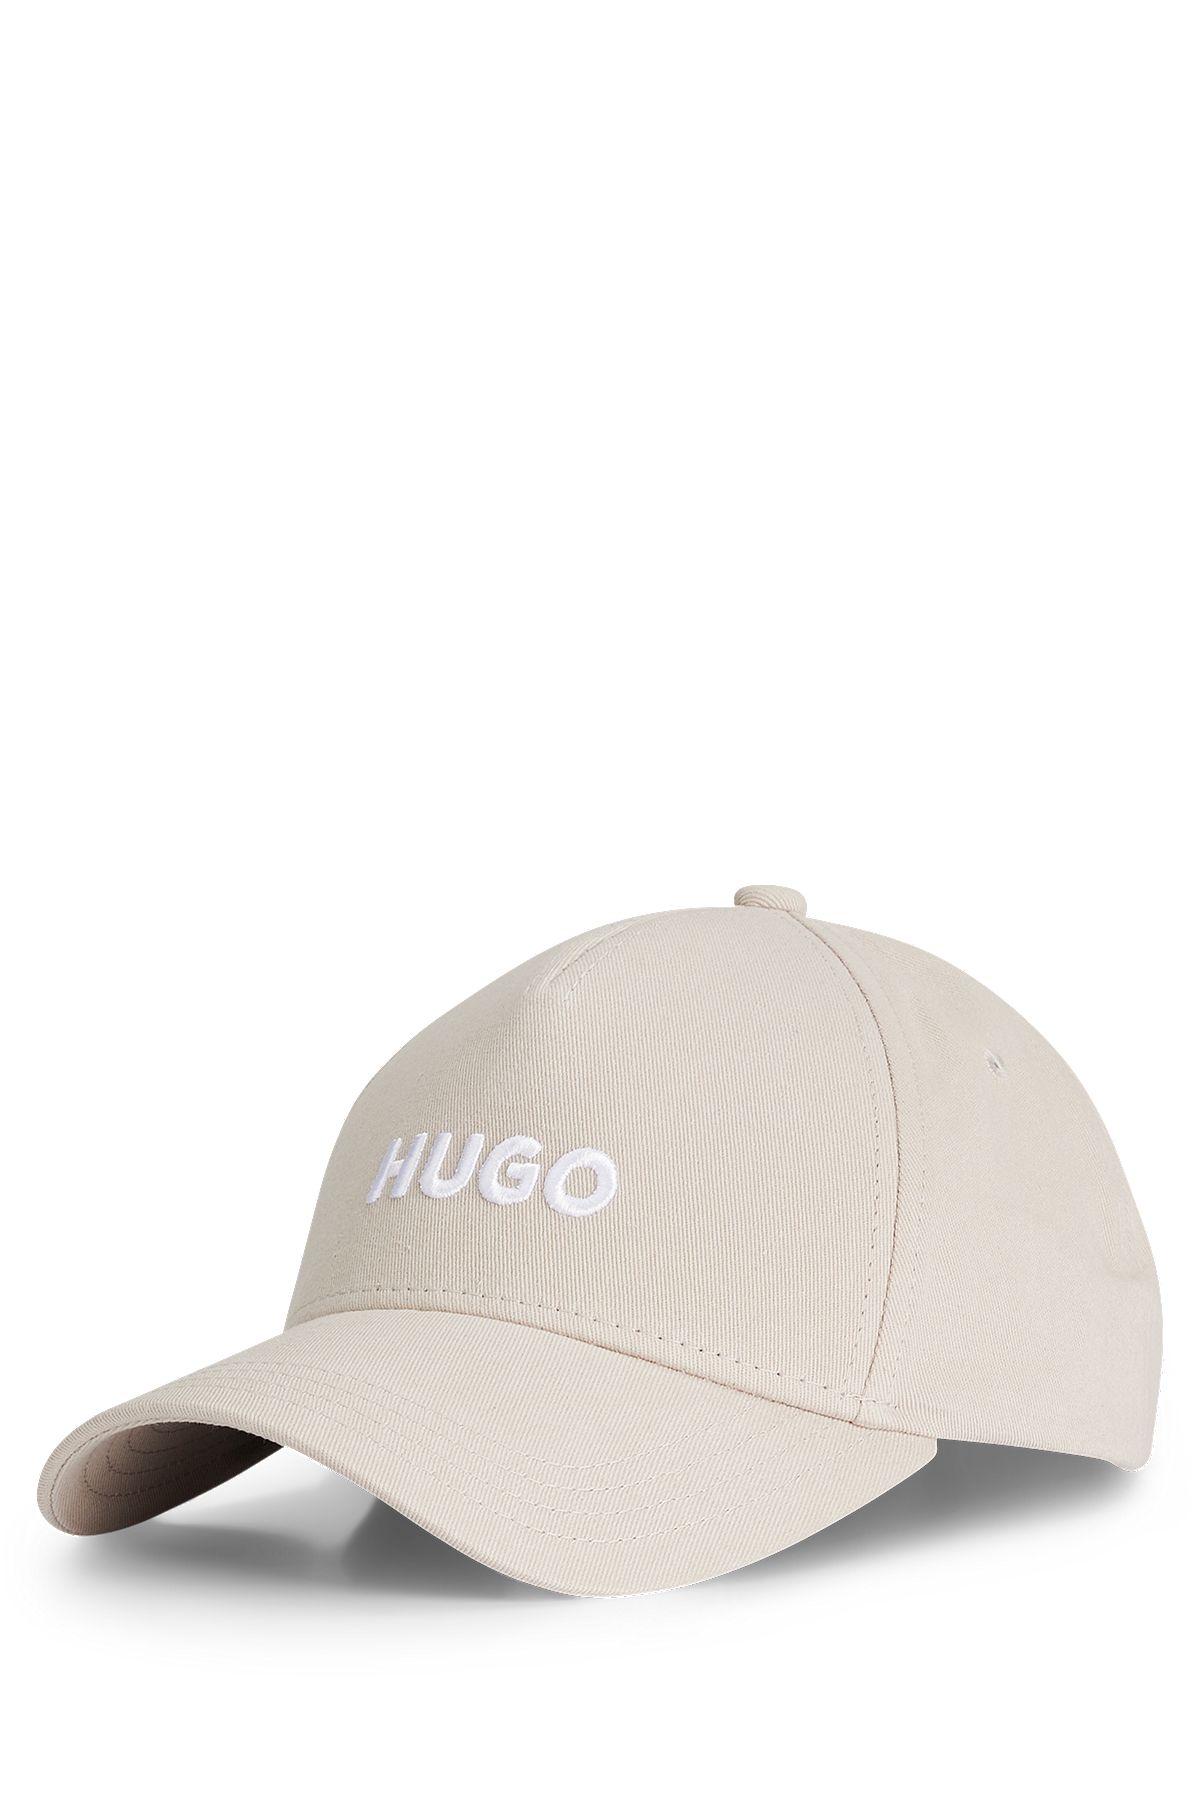 Cotton-twill cap with embroidered logo and snap closure, Light Beige